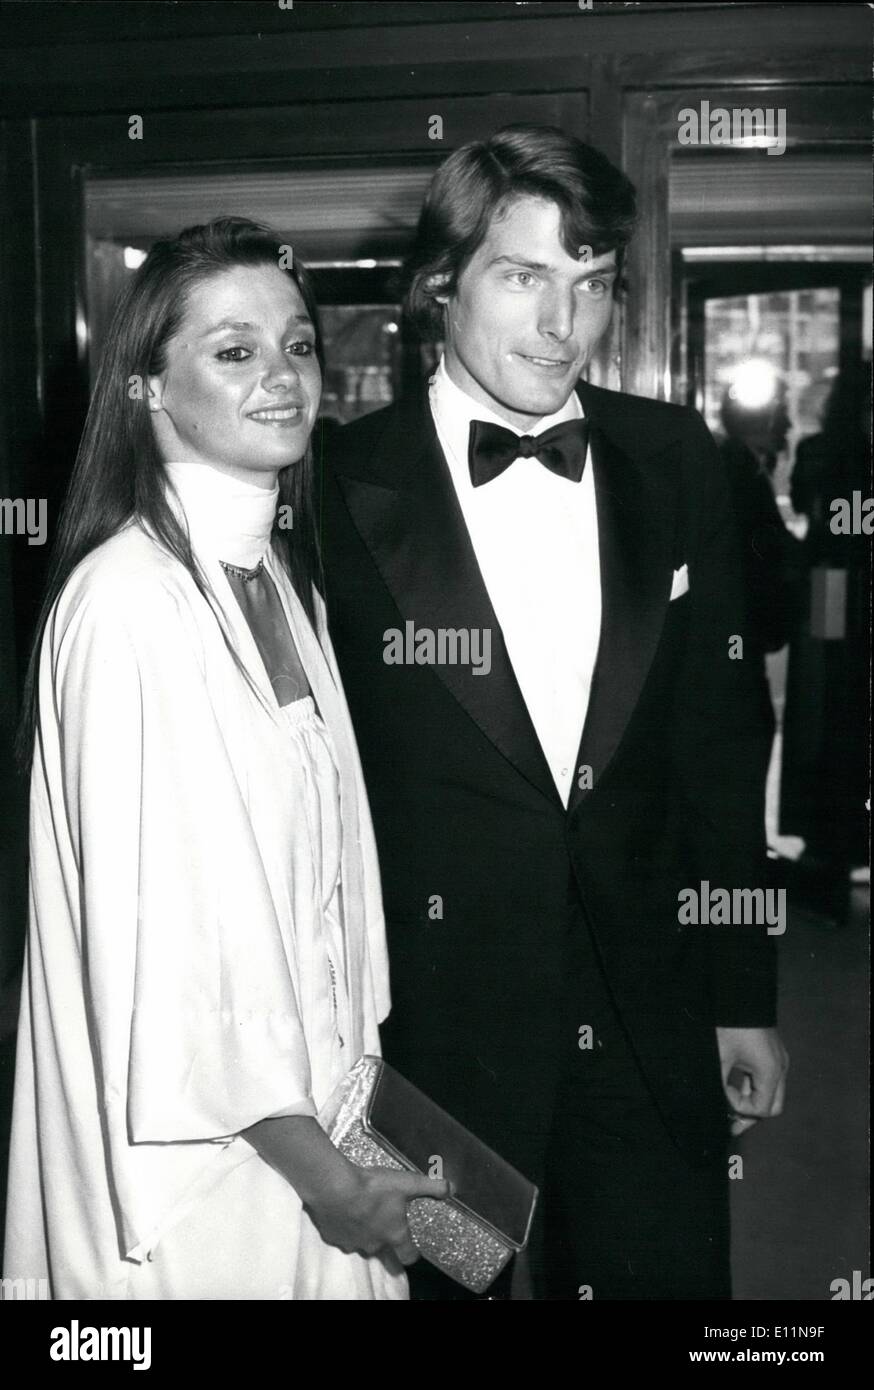 Mar. 23, 1979 - March 23rd, 1979 A super night for Superman Ã¢â‚¬â€œ Actor Christopher Reeve who was Superman in the film, seen Stock Photo